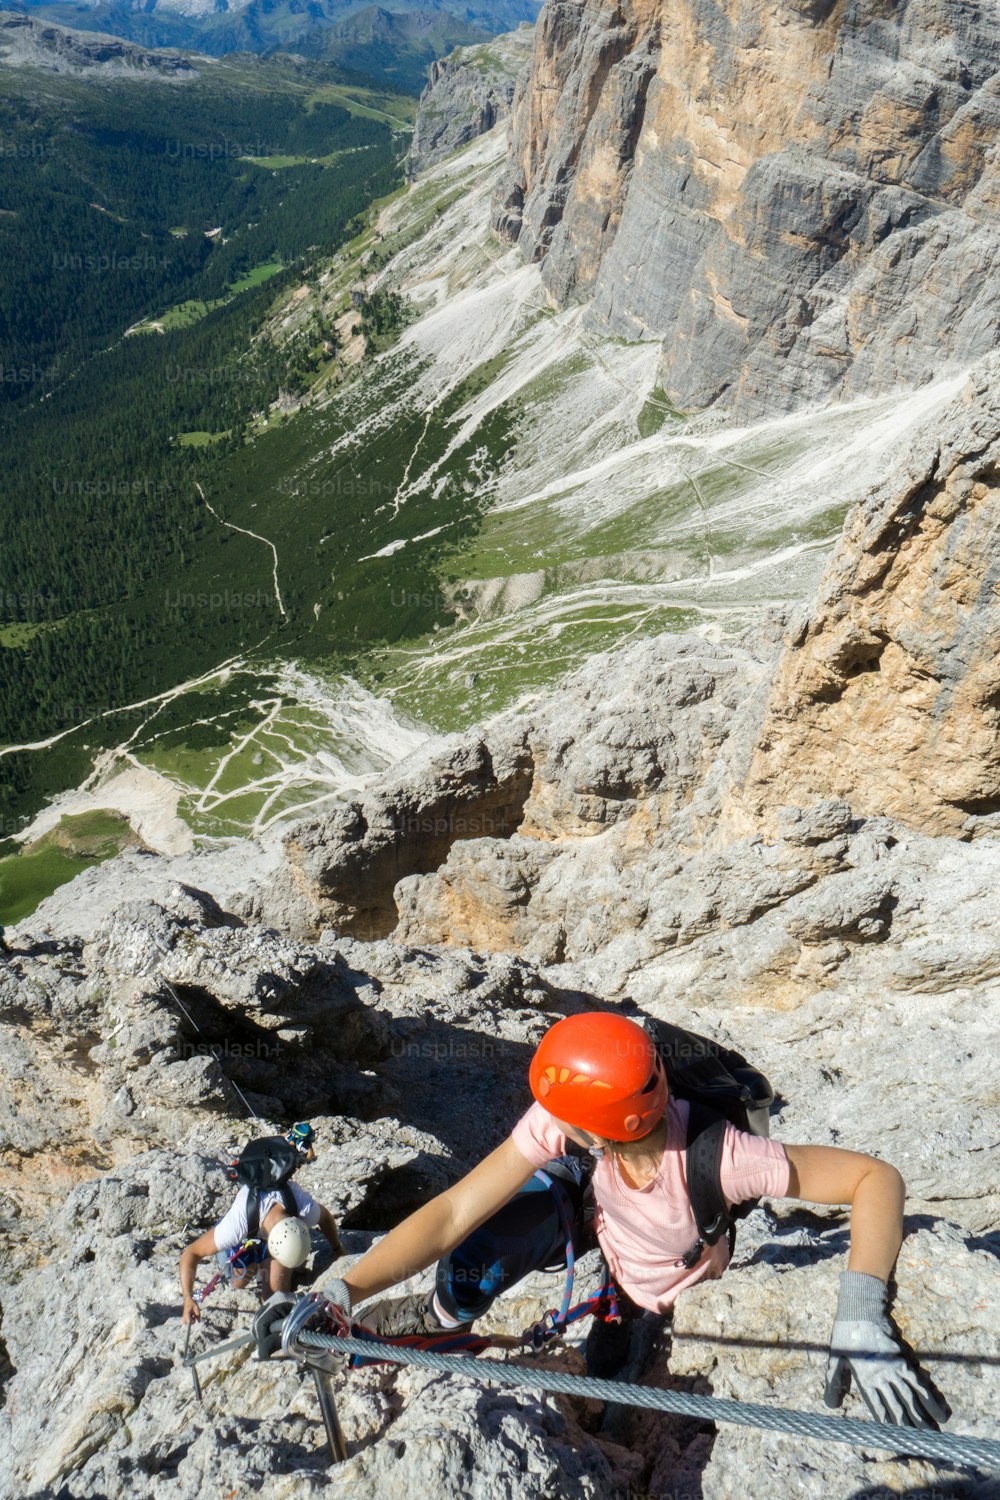 several young mountain climbers on very exposed Via Ferrata in Alta Badia in the Italian Dolomites